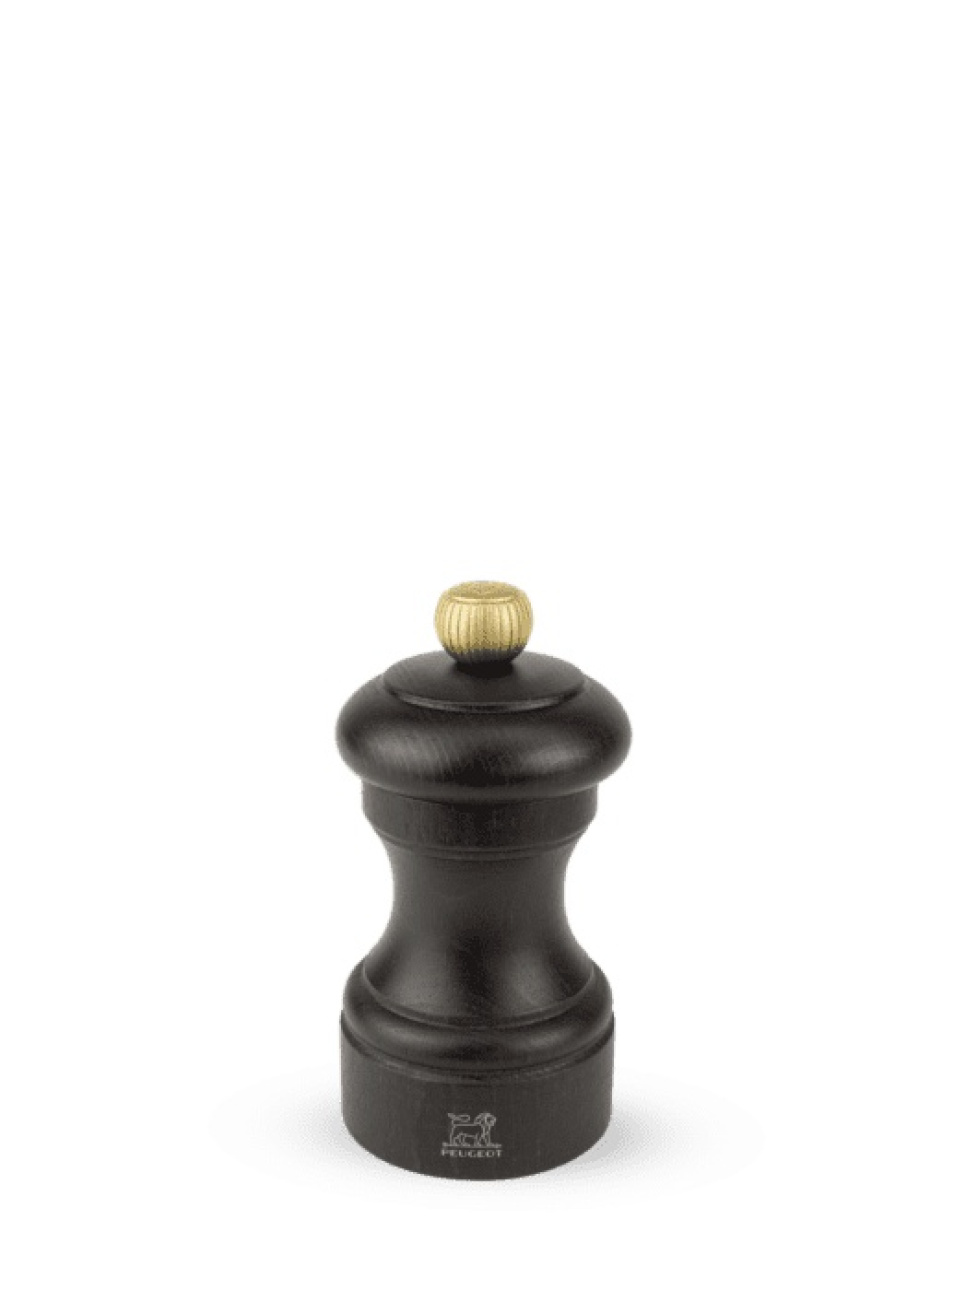 Bistro Chocolate Pepper mill 10 cm - Peugeot in the group Cooking / Kitchen utensils / Salt & pepper mills at KitchenLab (1090-16700)